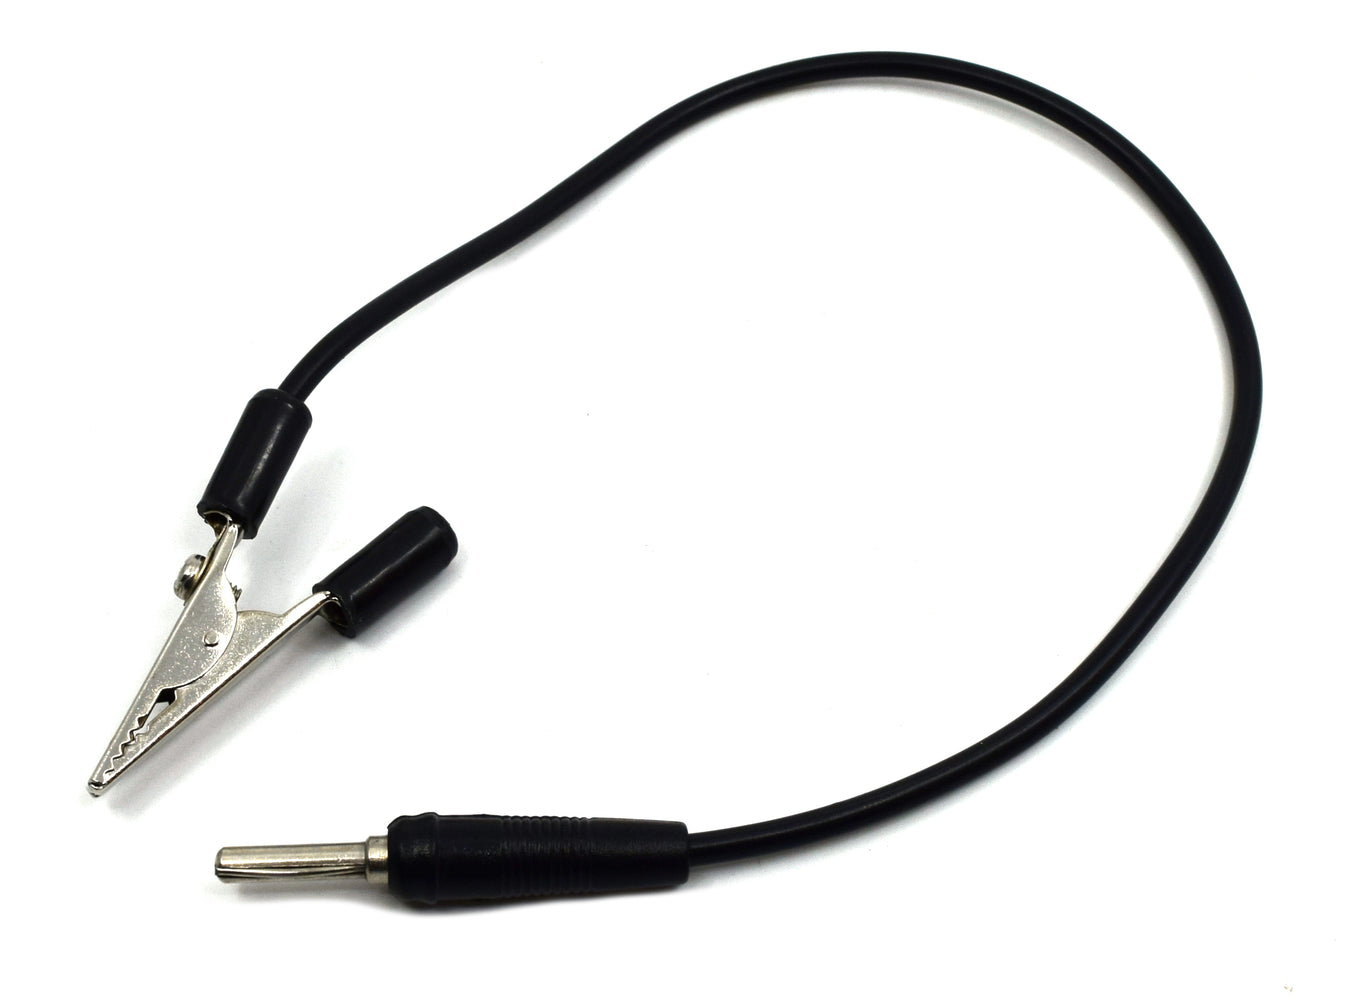 Connecting Lead, Black, 12" -Insulated - Alligator Clip, 4mm plug ends - Eisco Labs